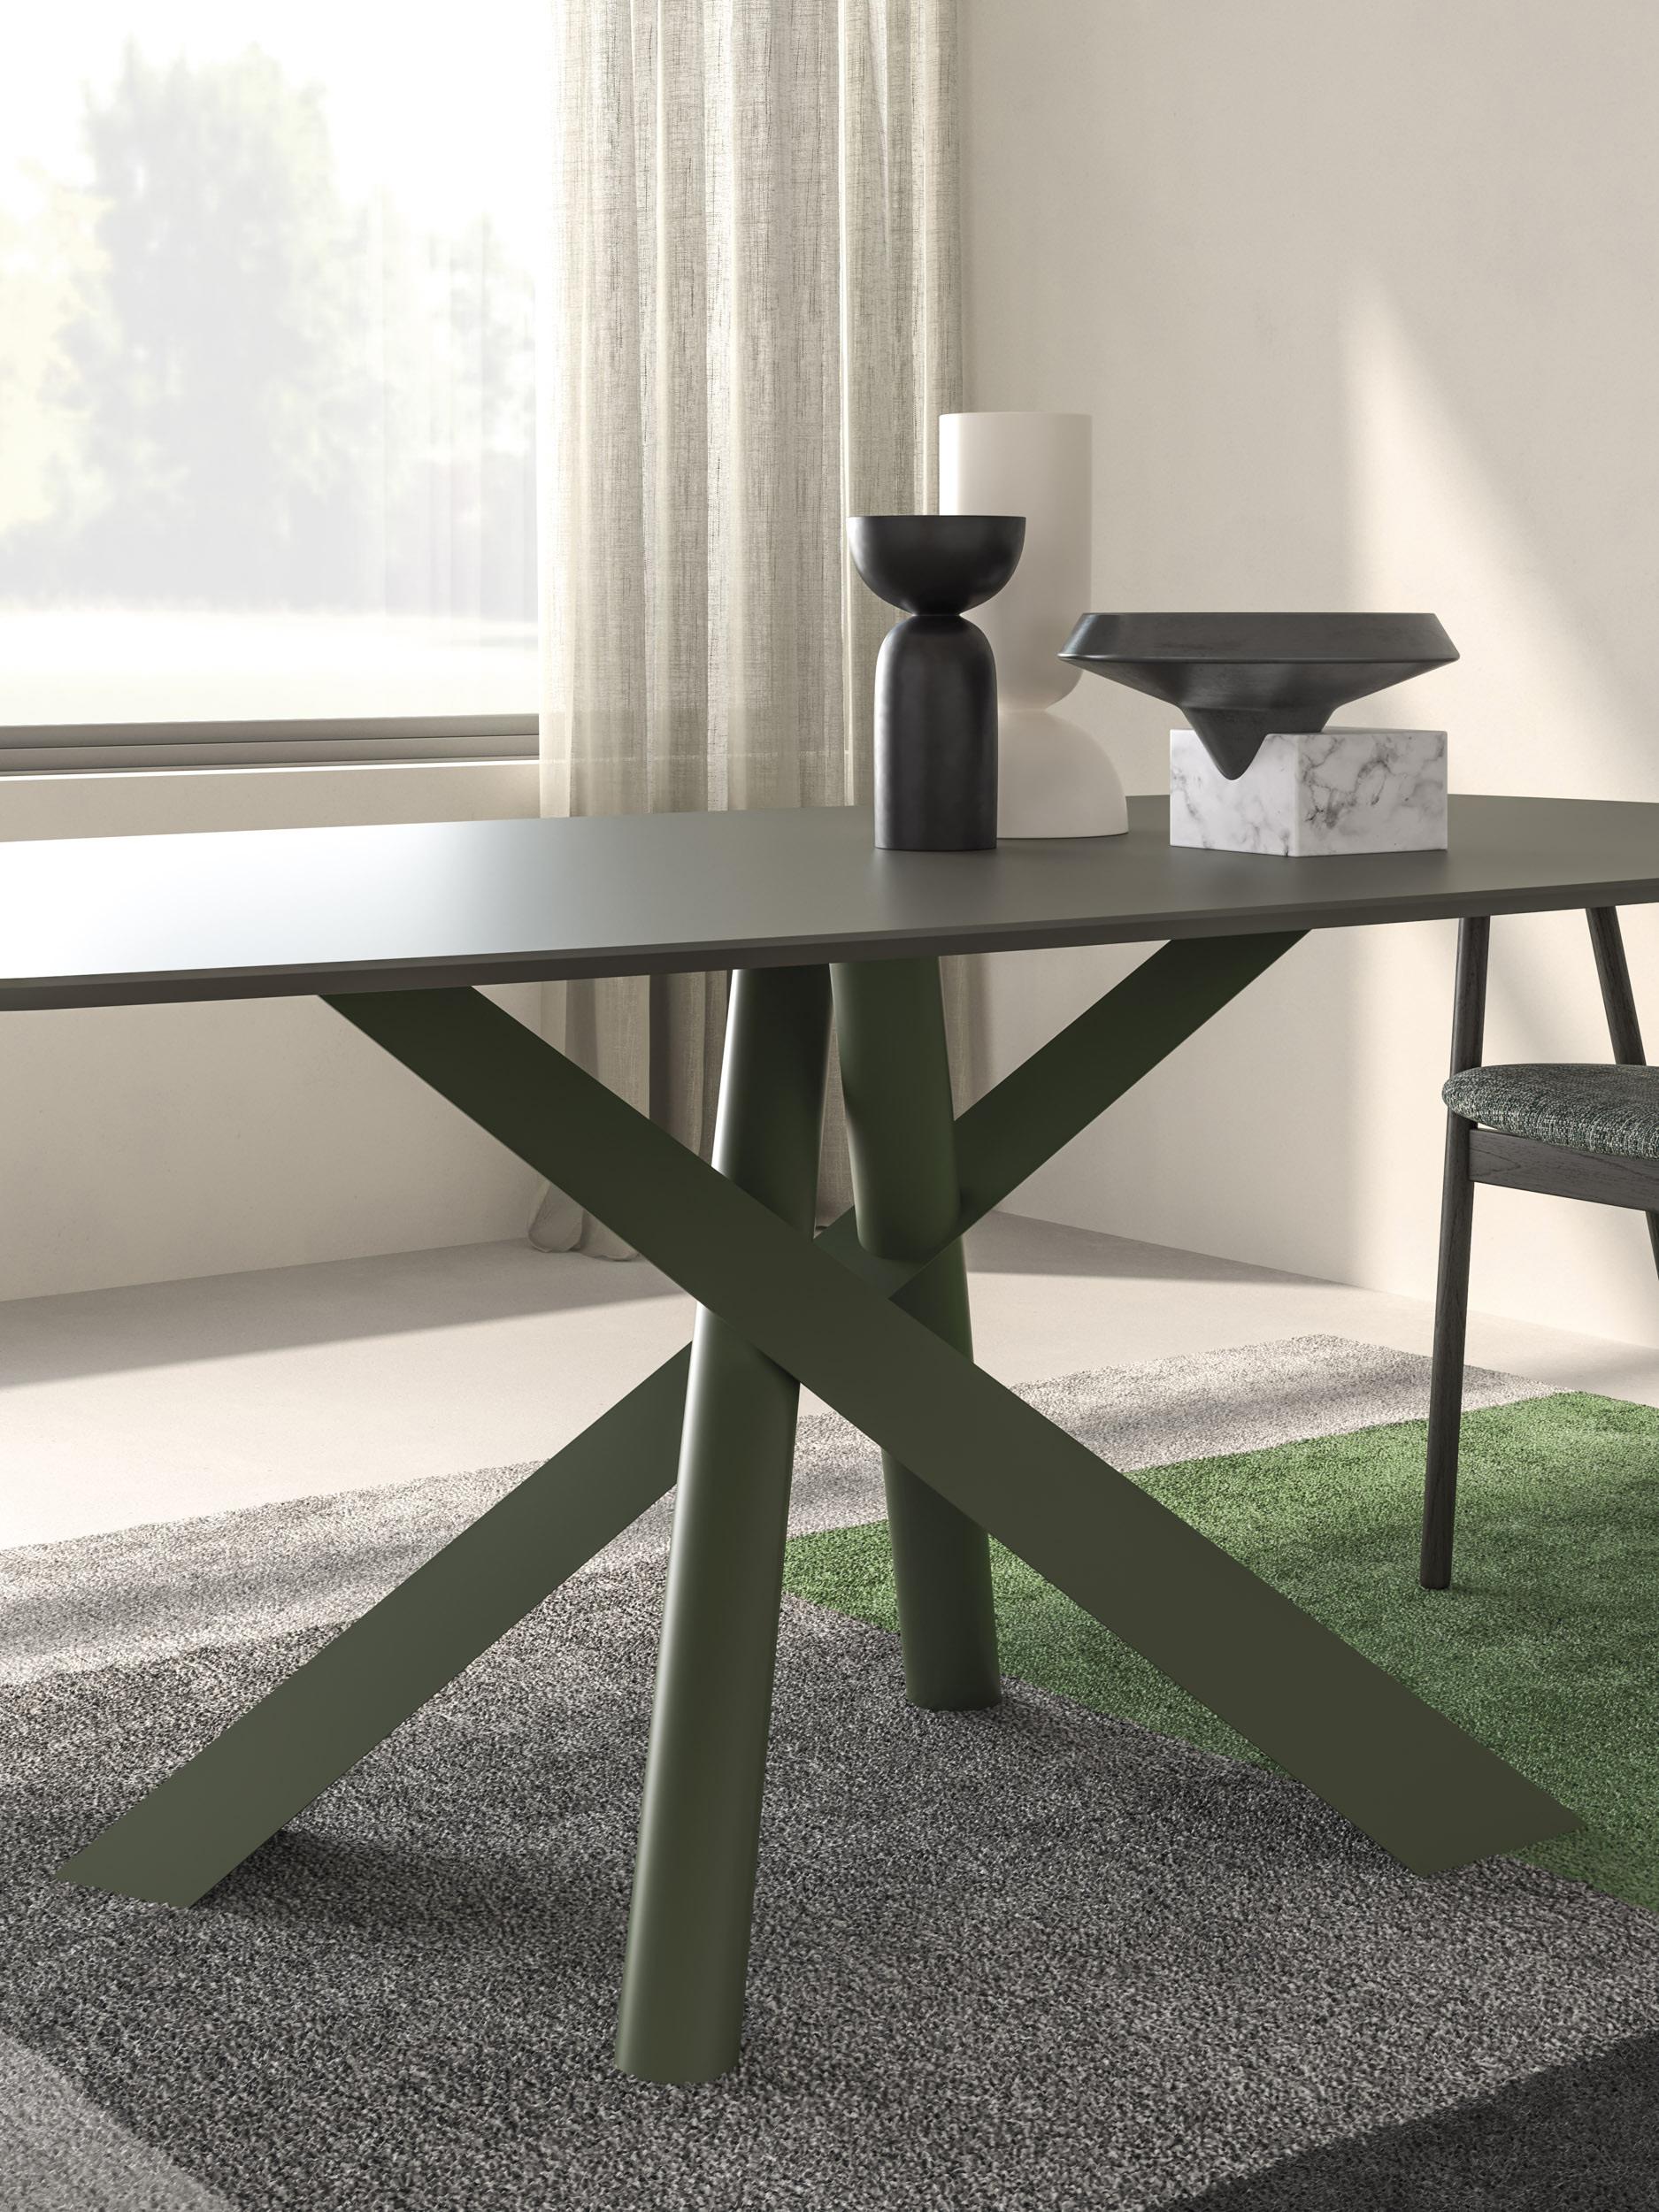 Diago 01-23 Fixed Table by Orme Design